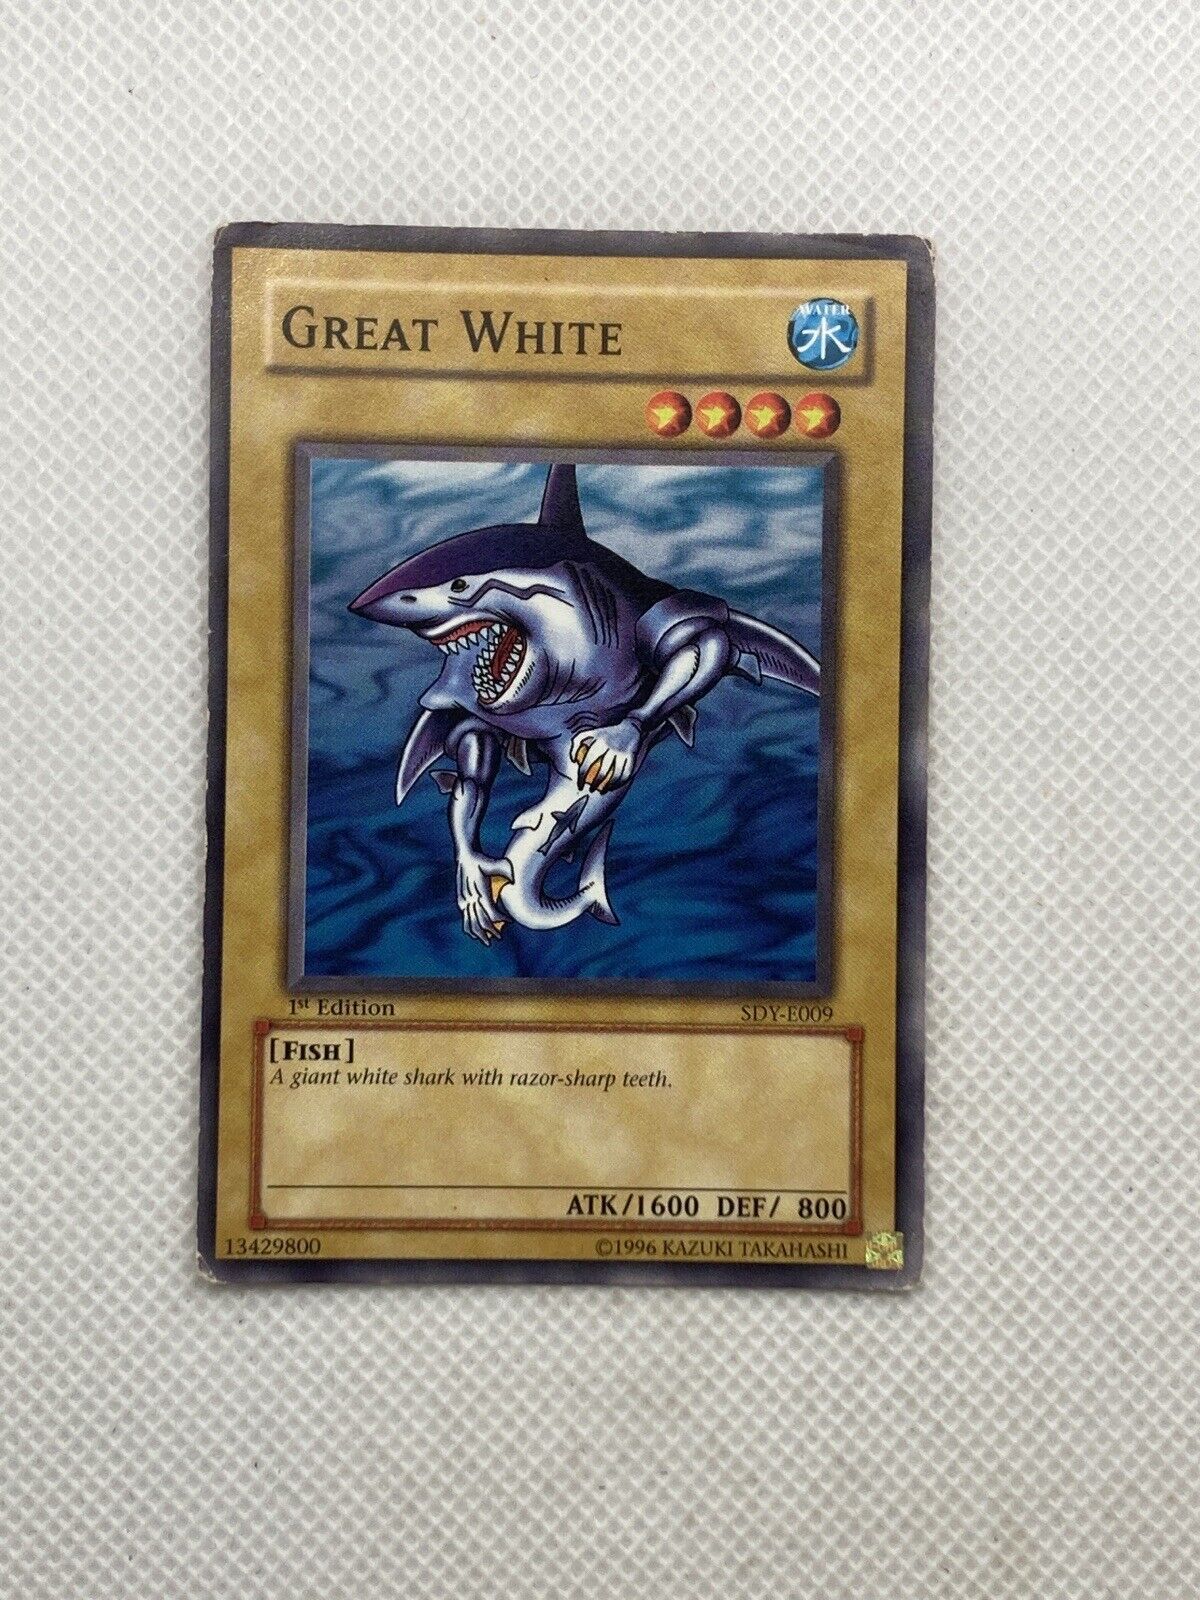 GREAT WHITE - SDY-011 - Common  - 1st Edition